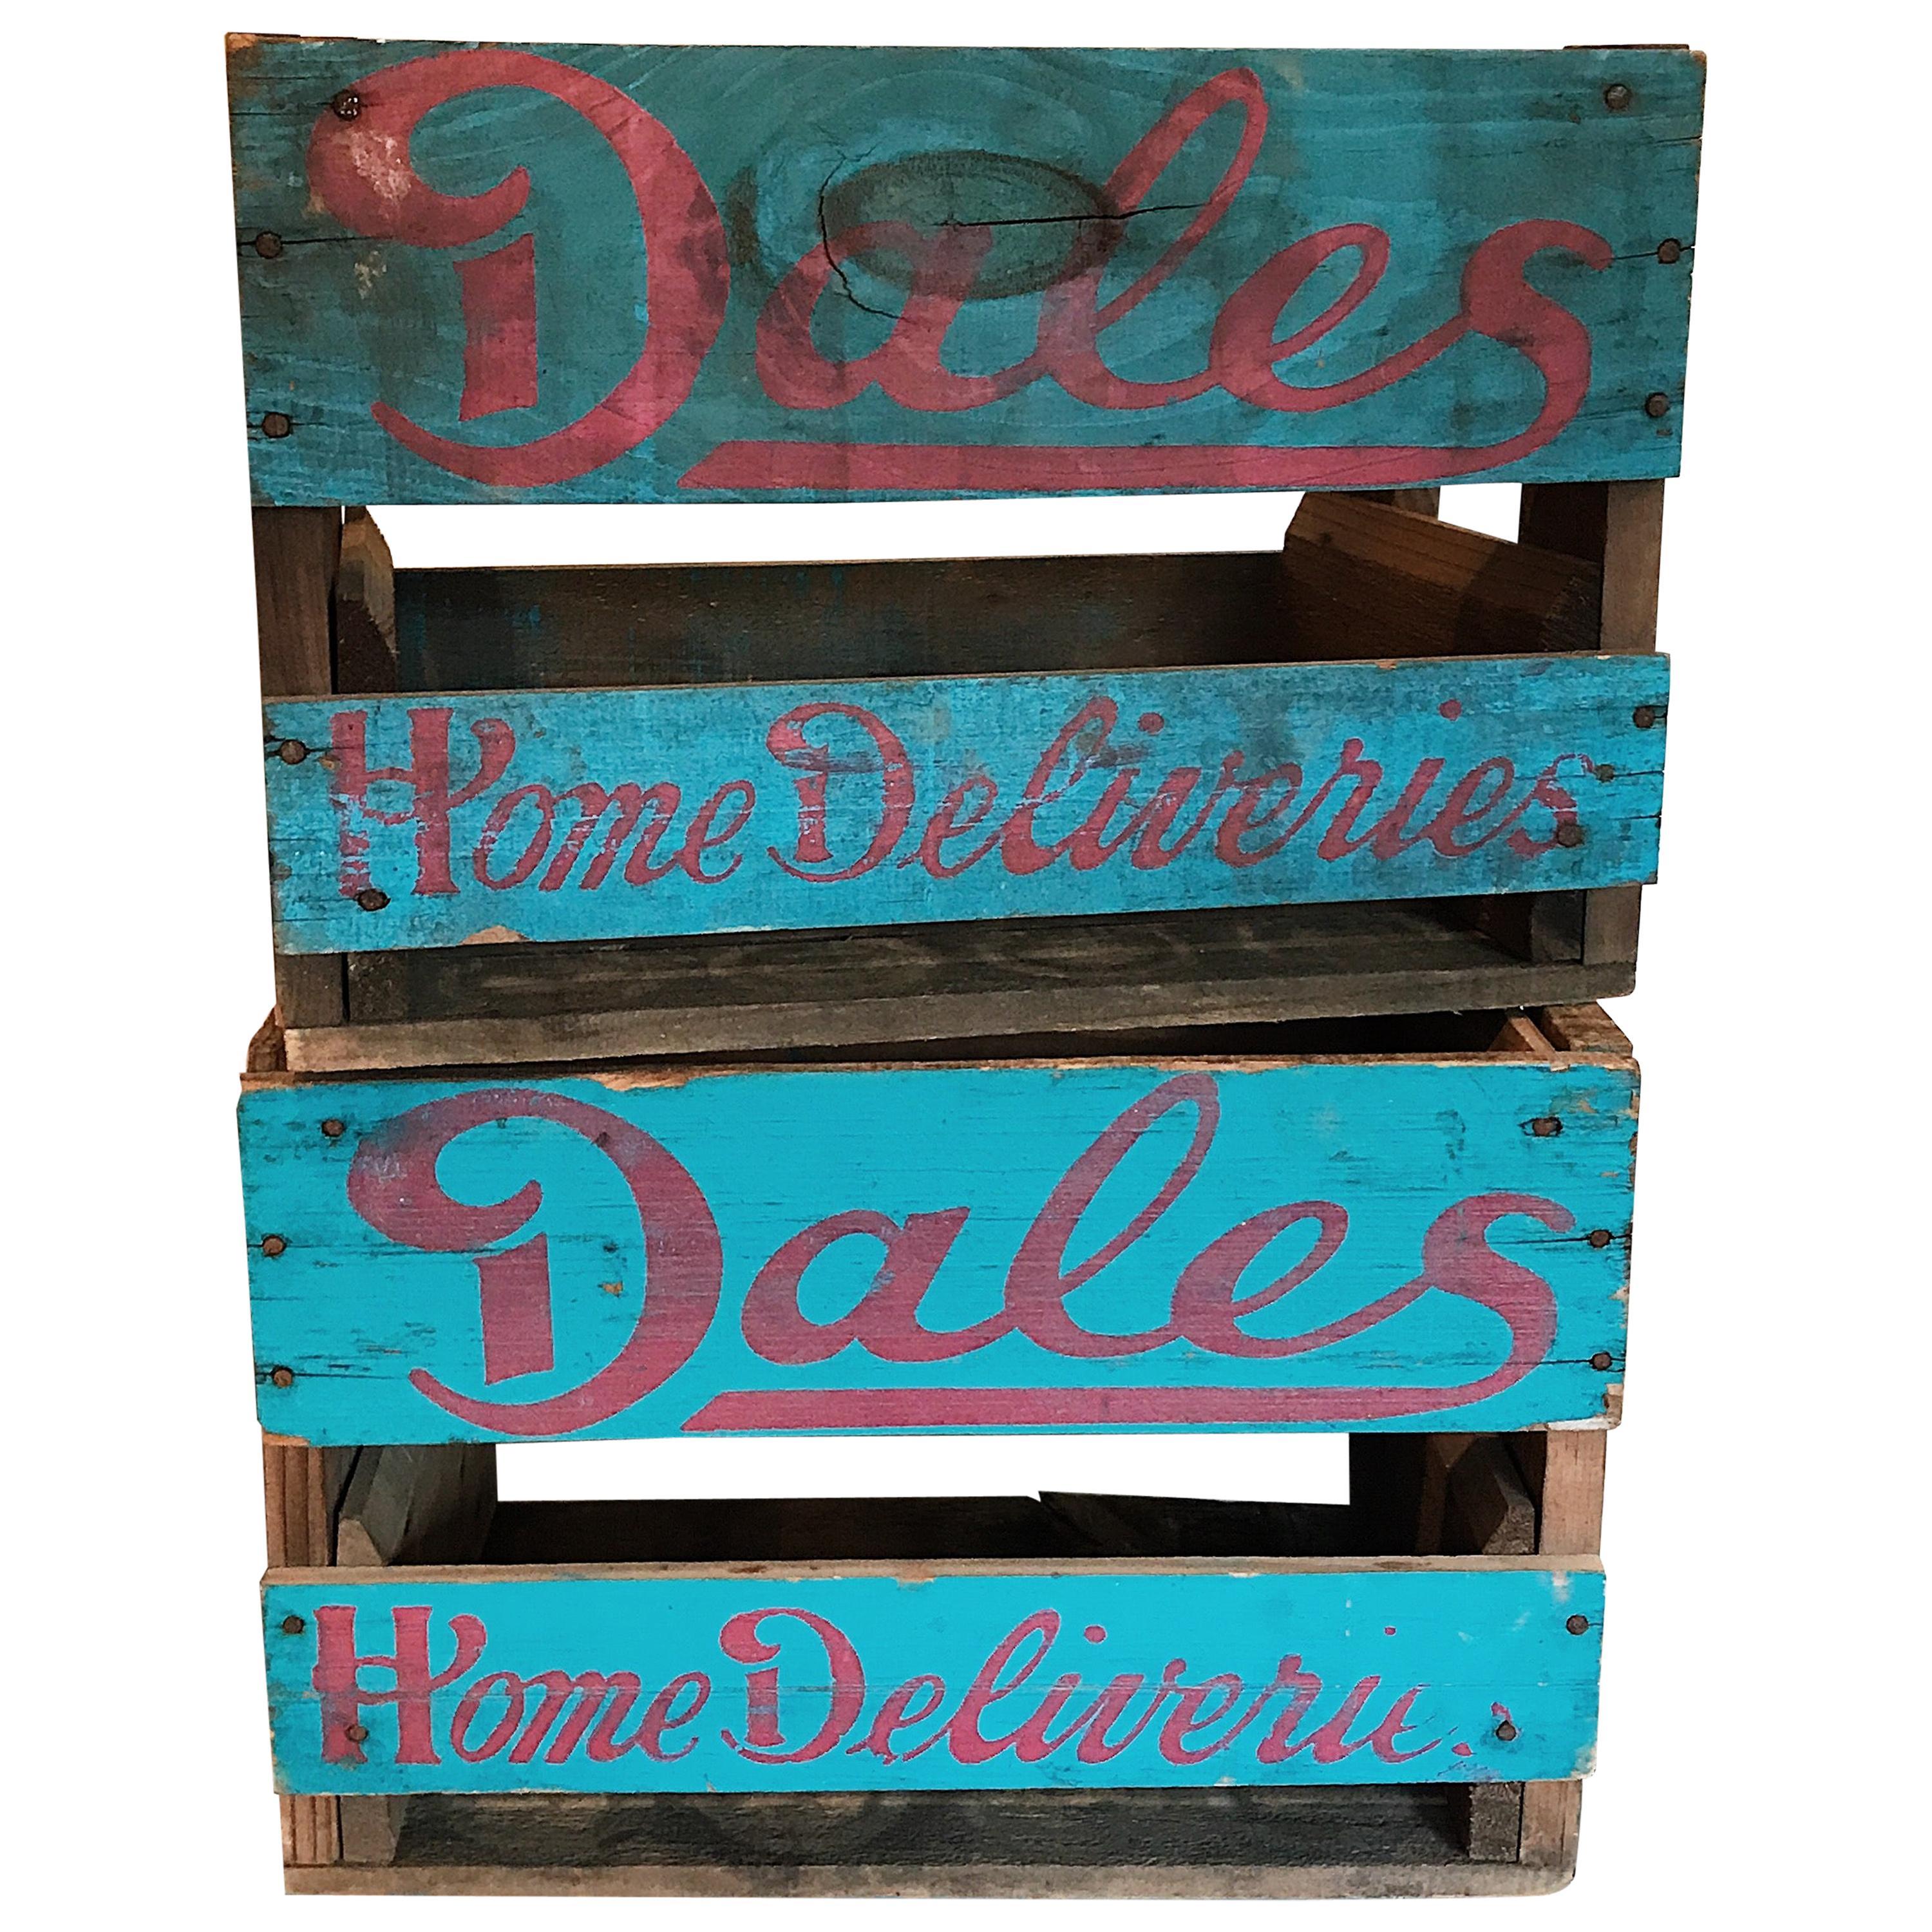 Midcentury "Dales Home Deliveries" Brand Painted Wooden Soda Crate Boxes For Sale